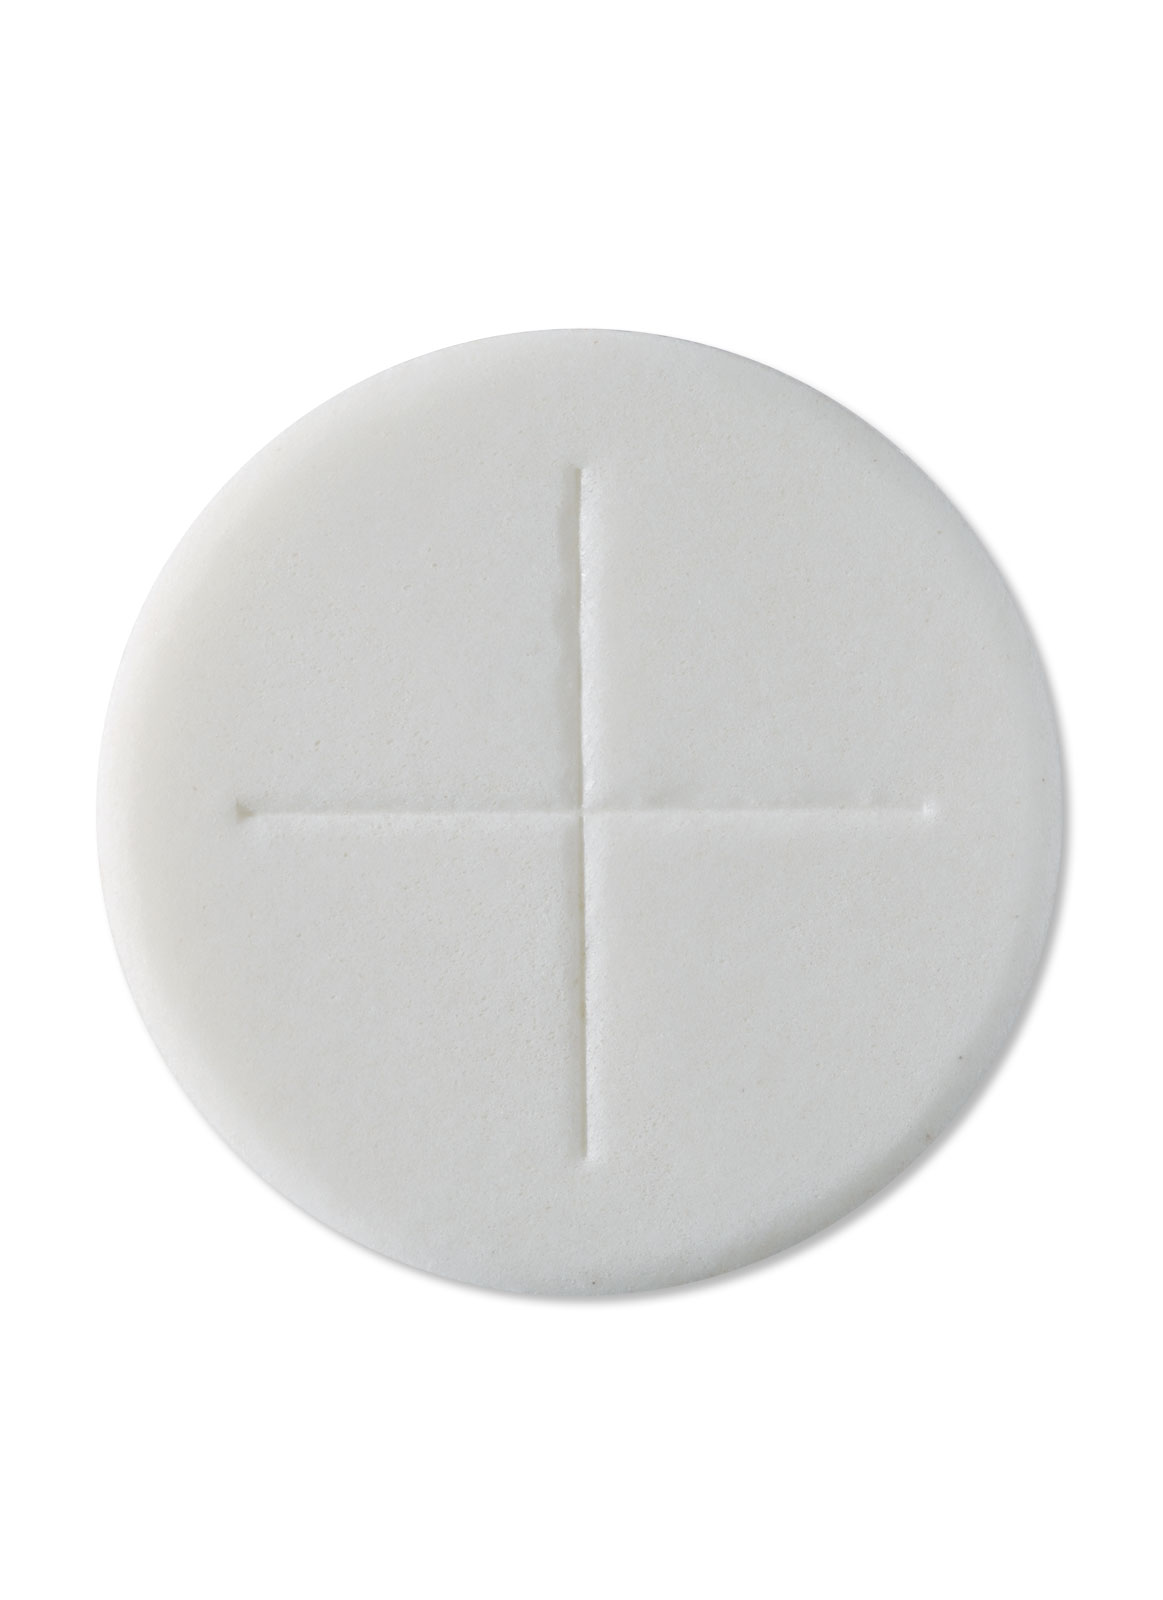 Peoples Altar Bread Single Cross 1 1 8 White Pack of 250